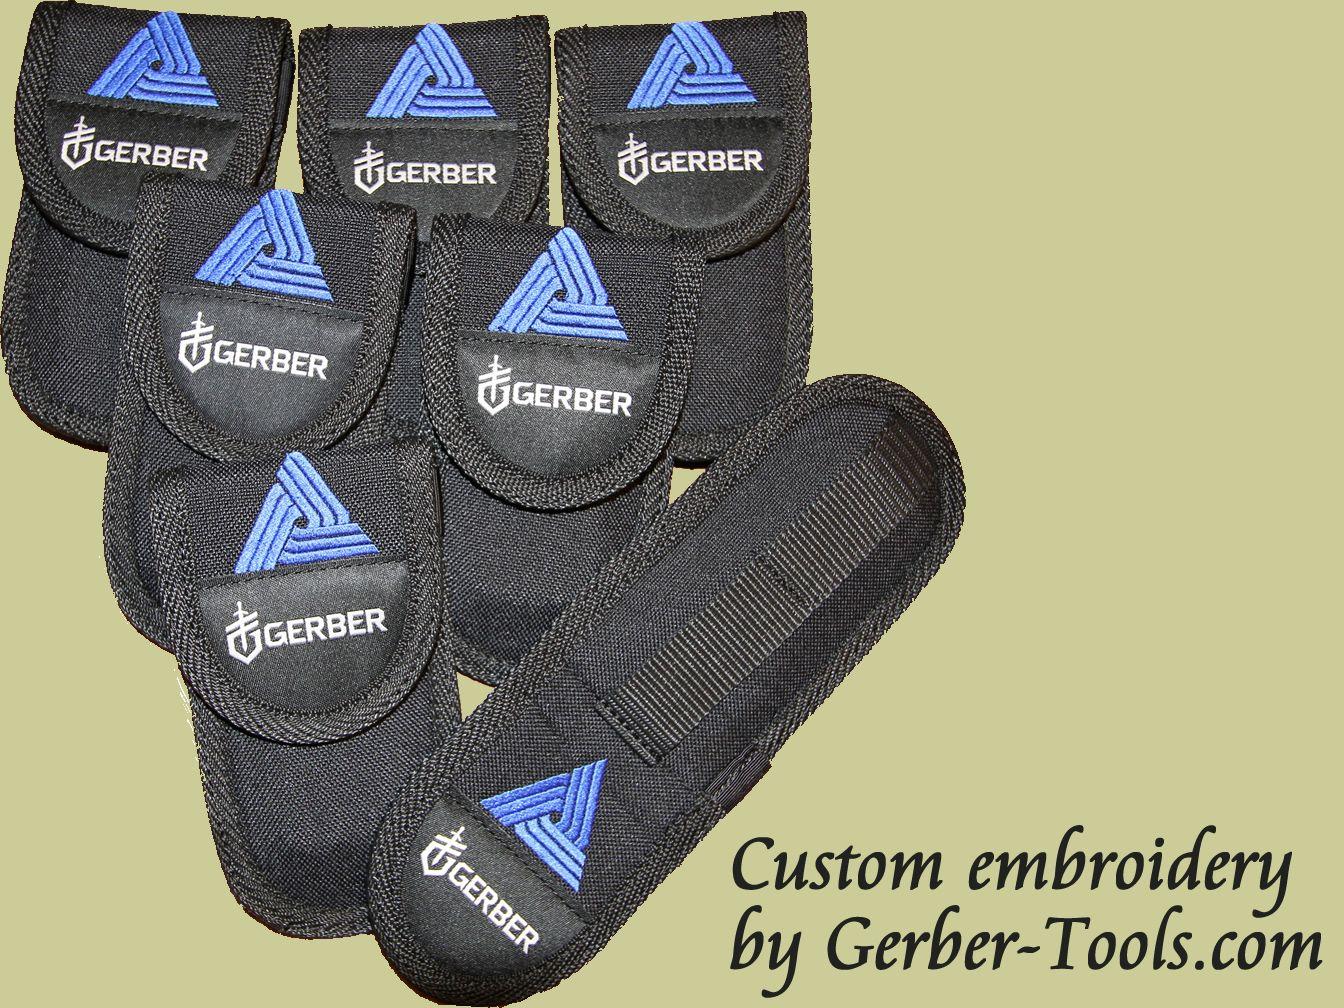 Gerber Tools Logo - Laser Engraving and Embroidery on Gerber Knives and Tools